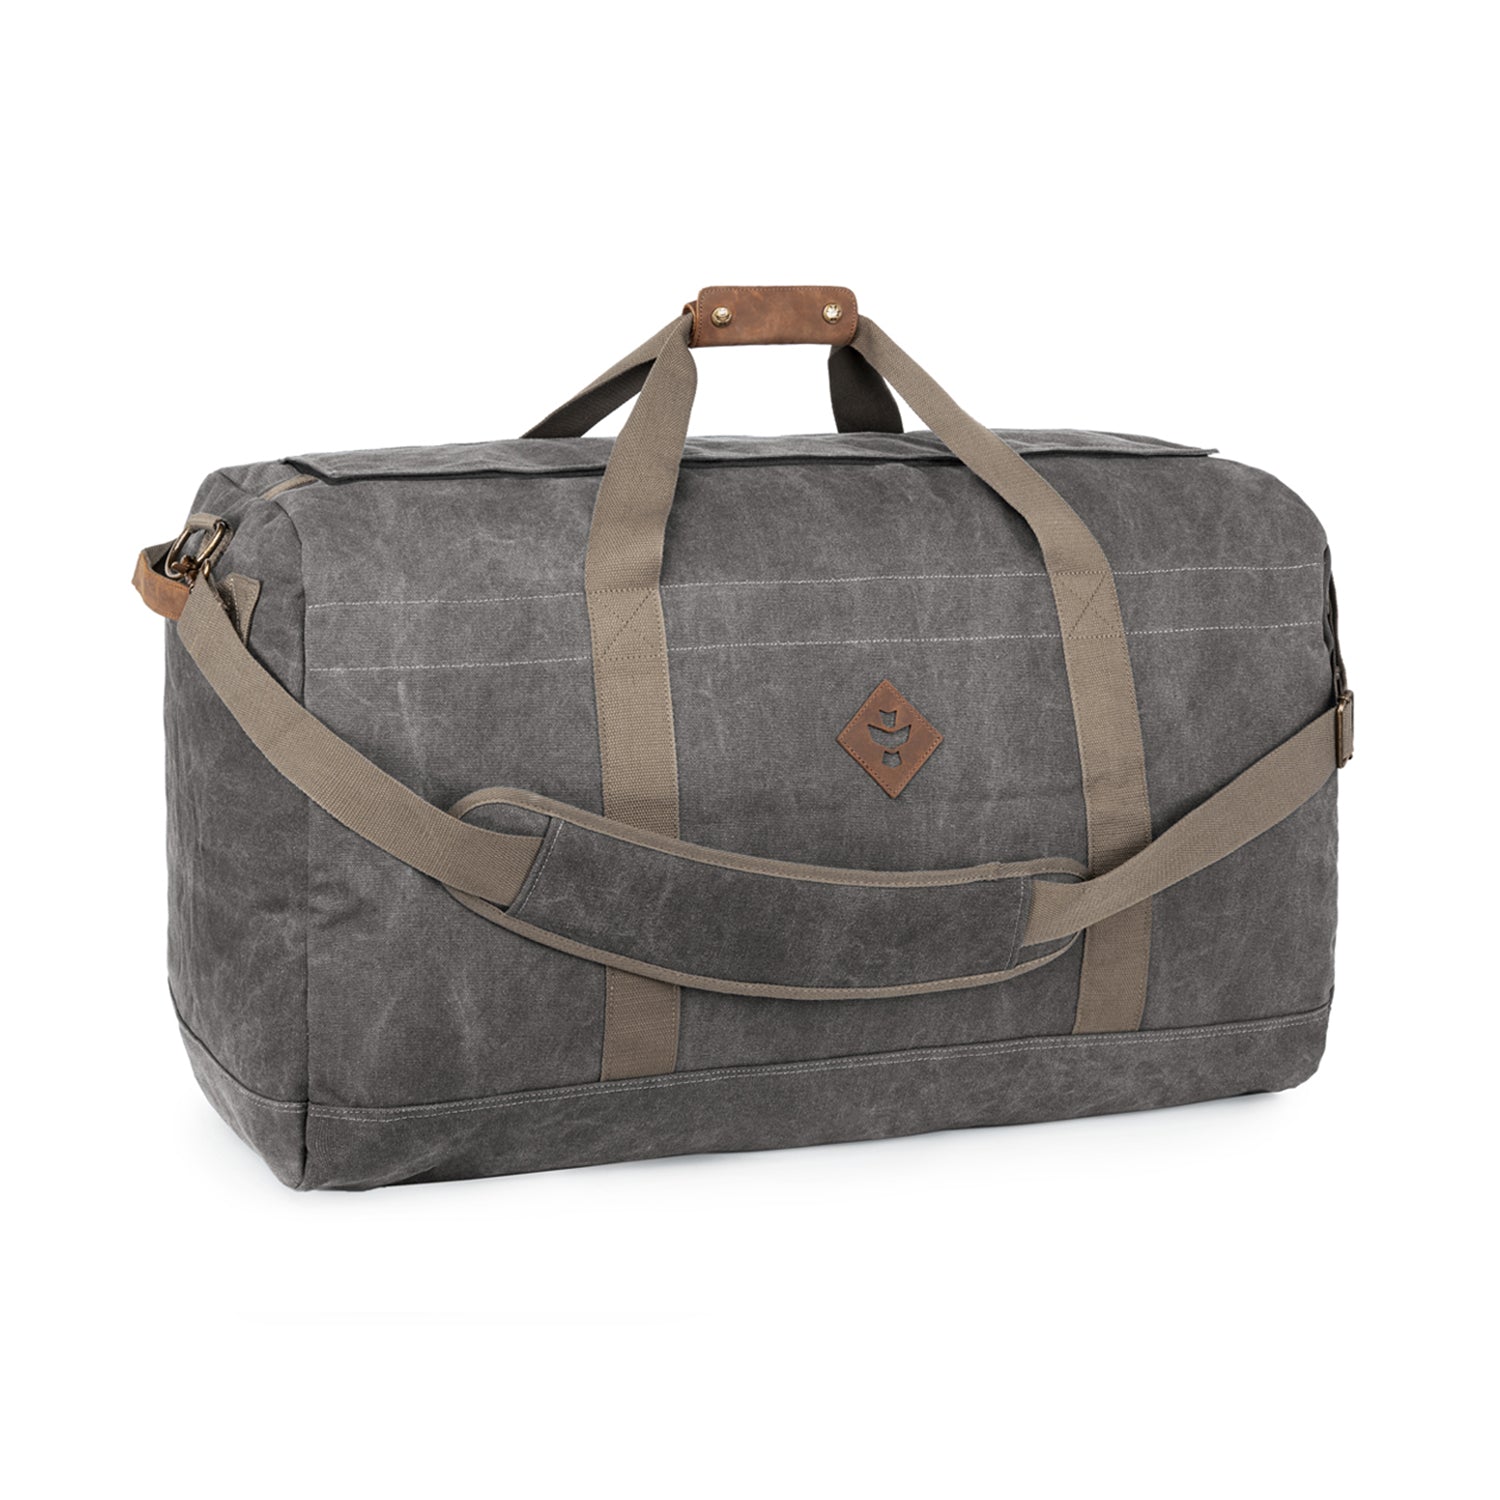 Ash Canvas Smell Proof Water Resistant Large Duffle Bag